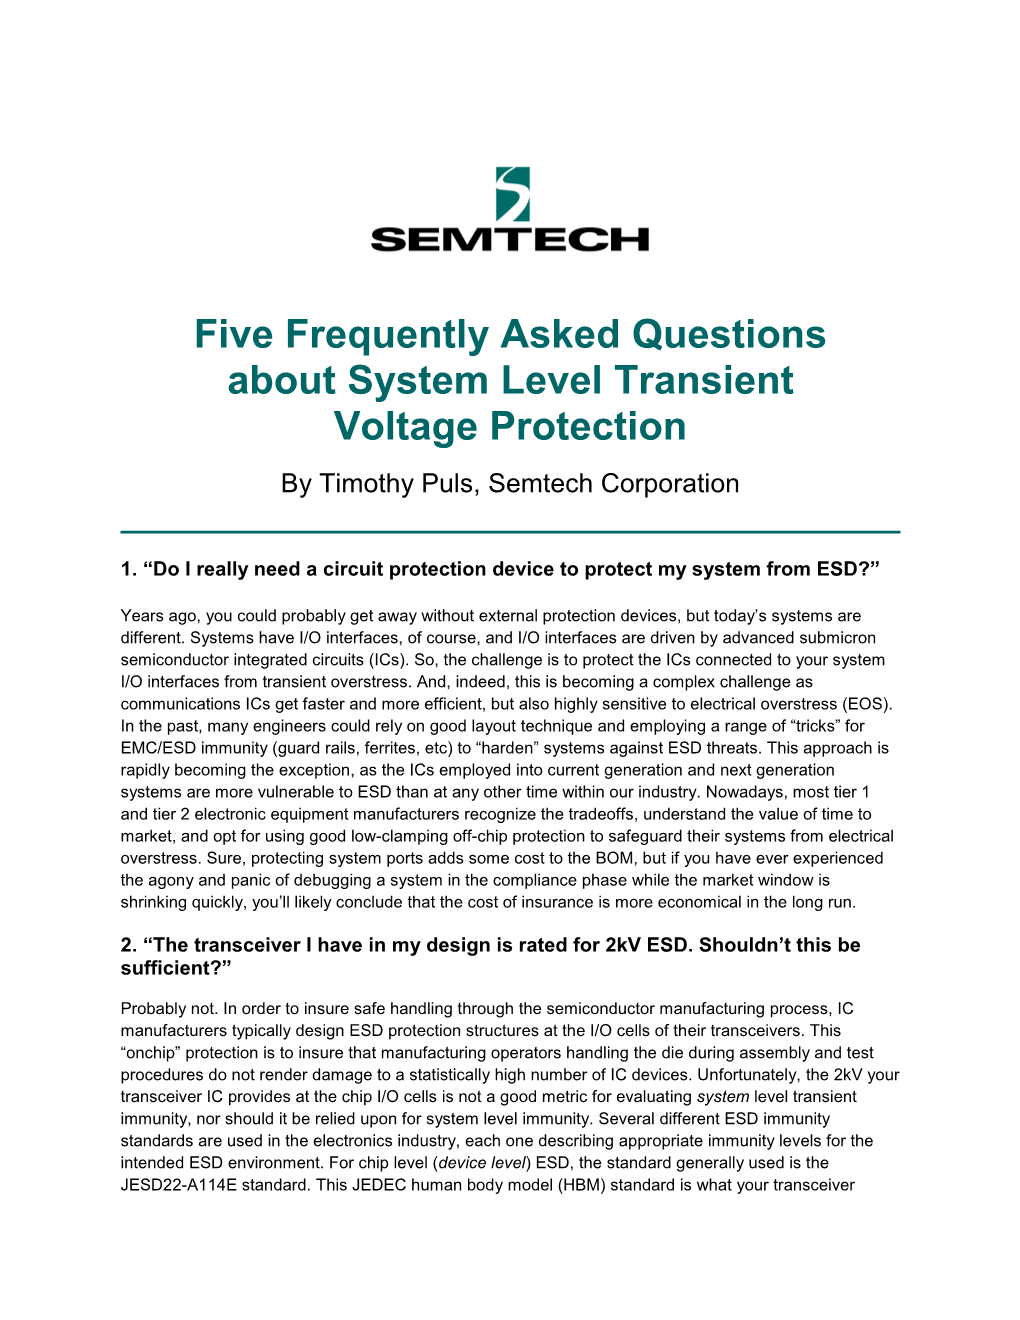 Five Frequently Asked Questions About System Level Transient Voltage Protection